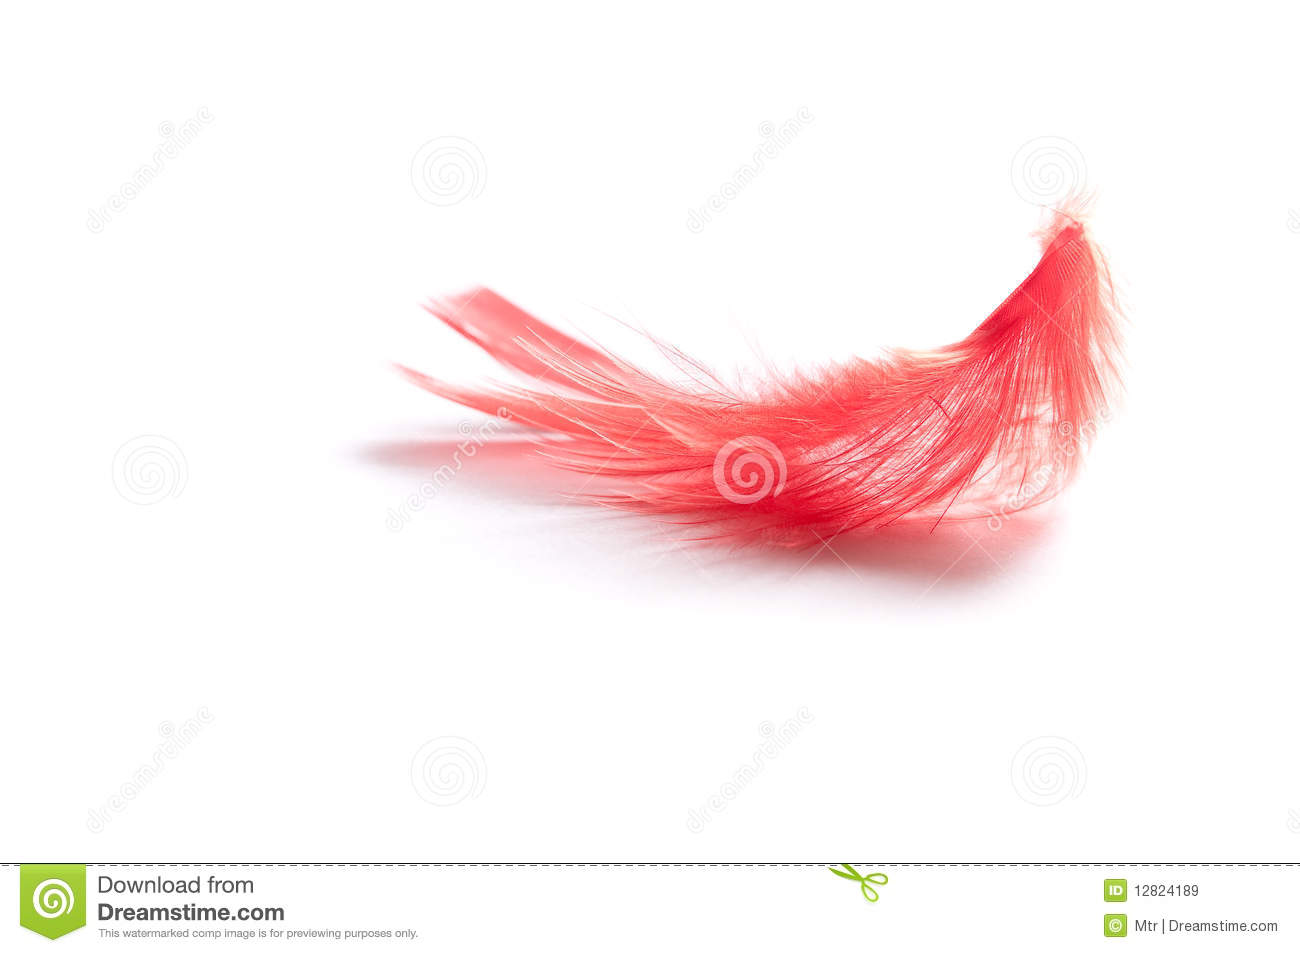 Red Feather Royalty Free Stock Images   Image  12824189